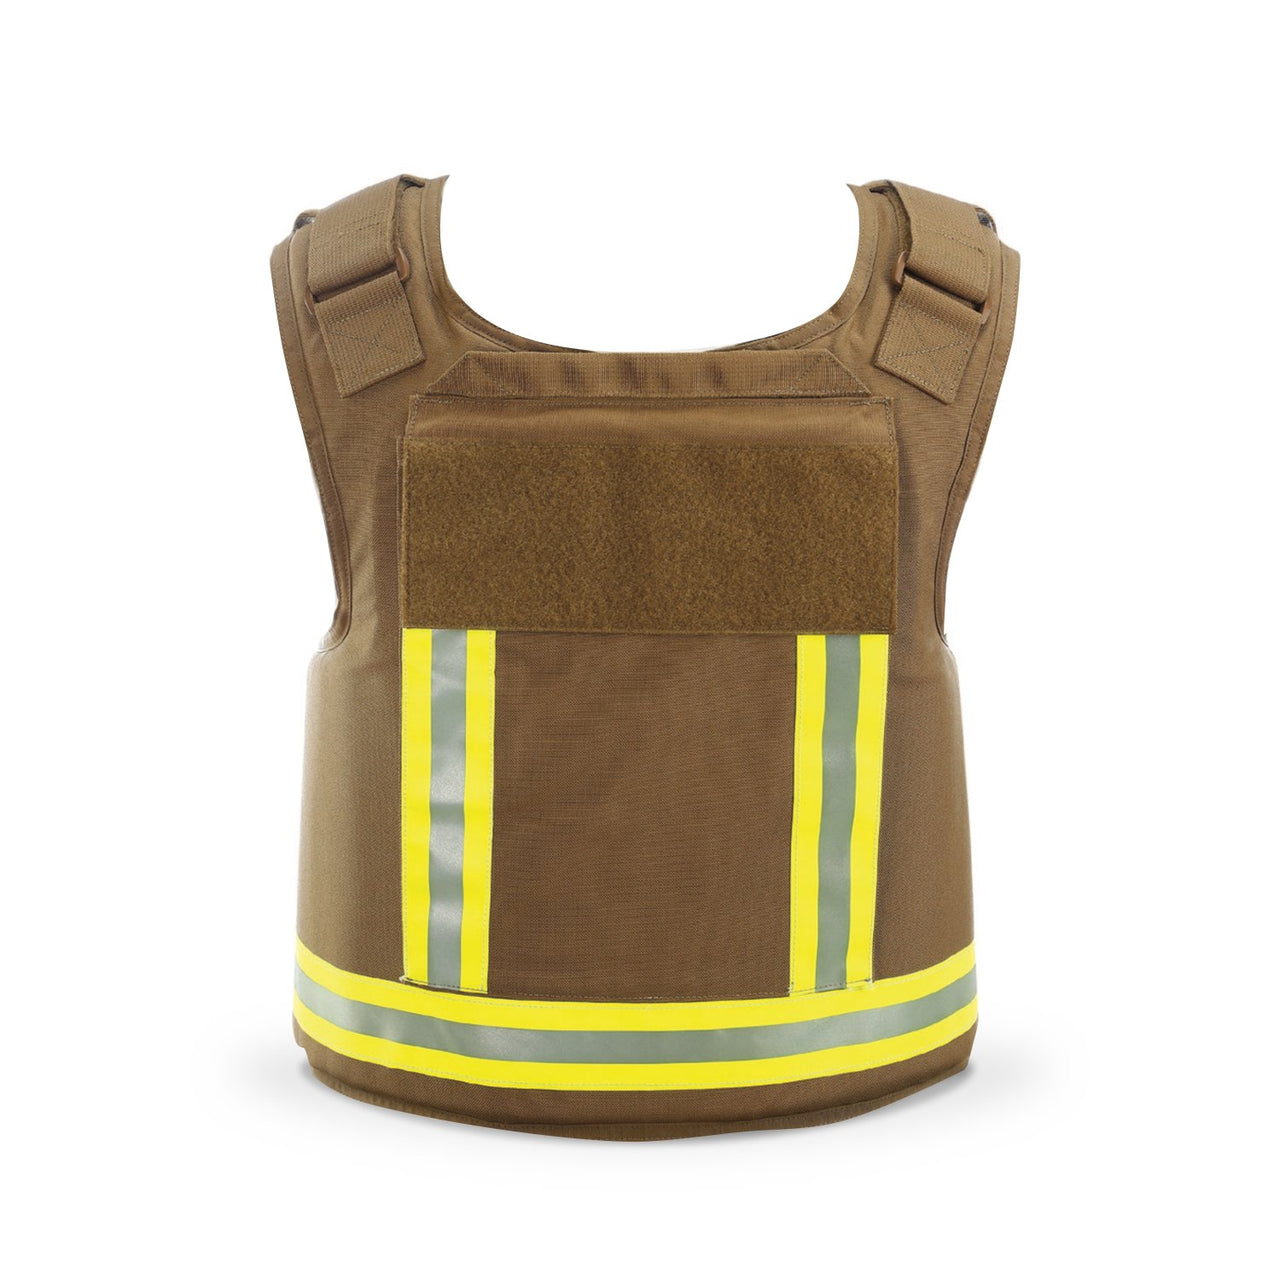 A Body Armor Direct First Responder Tactical Multi-Threat Vest with reflective strips on it.